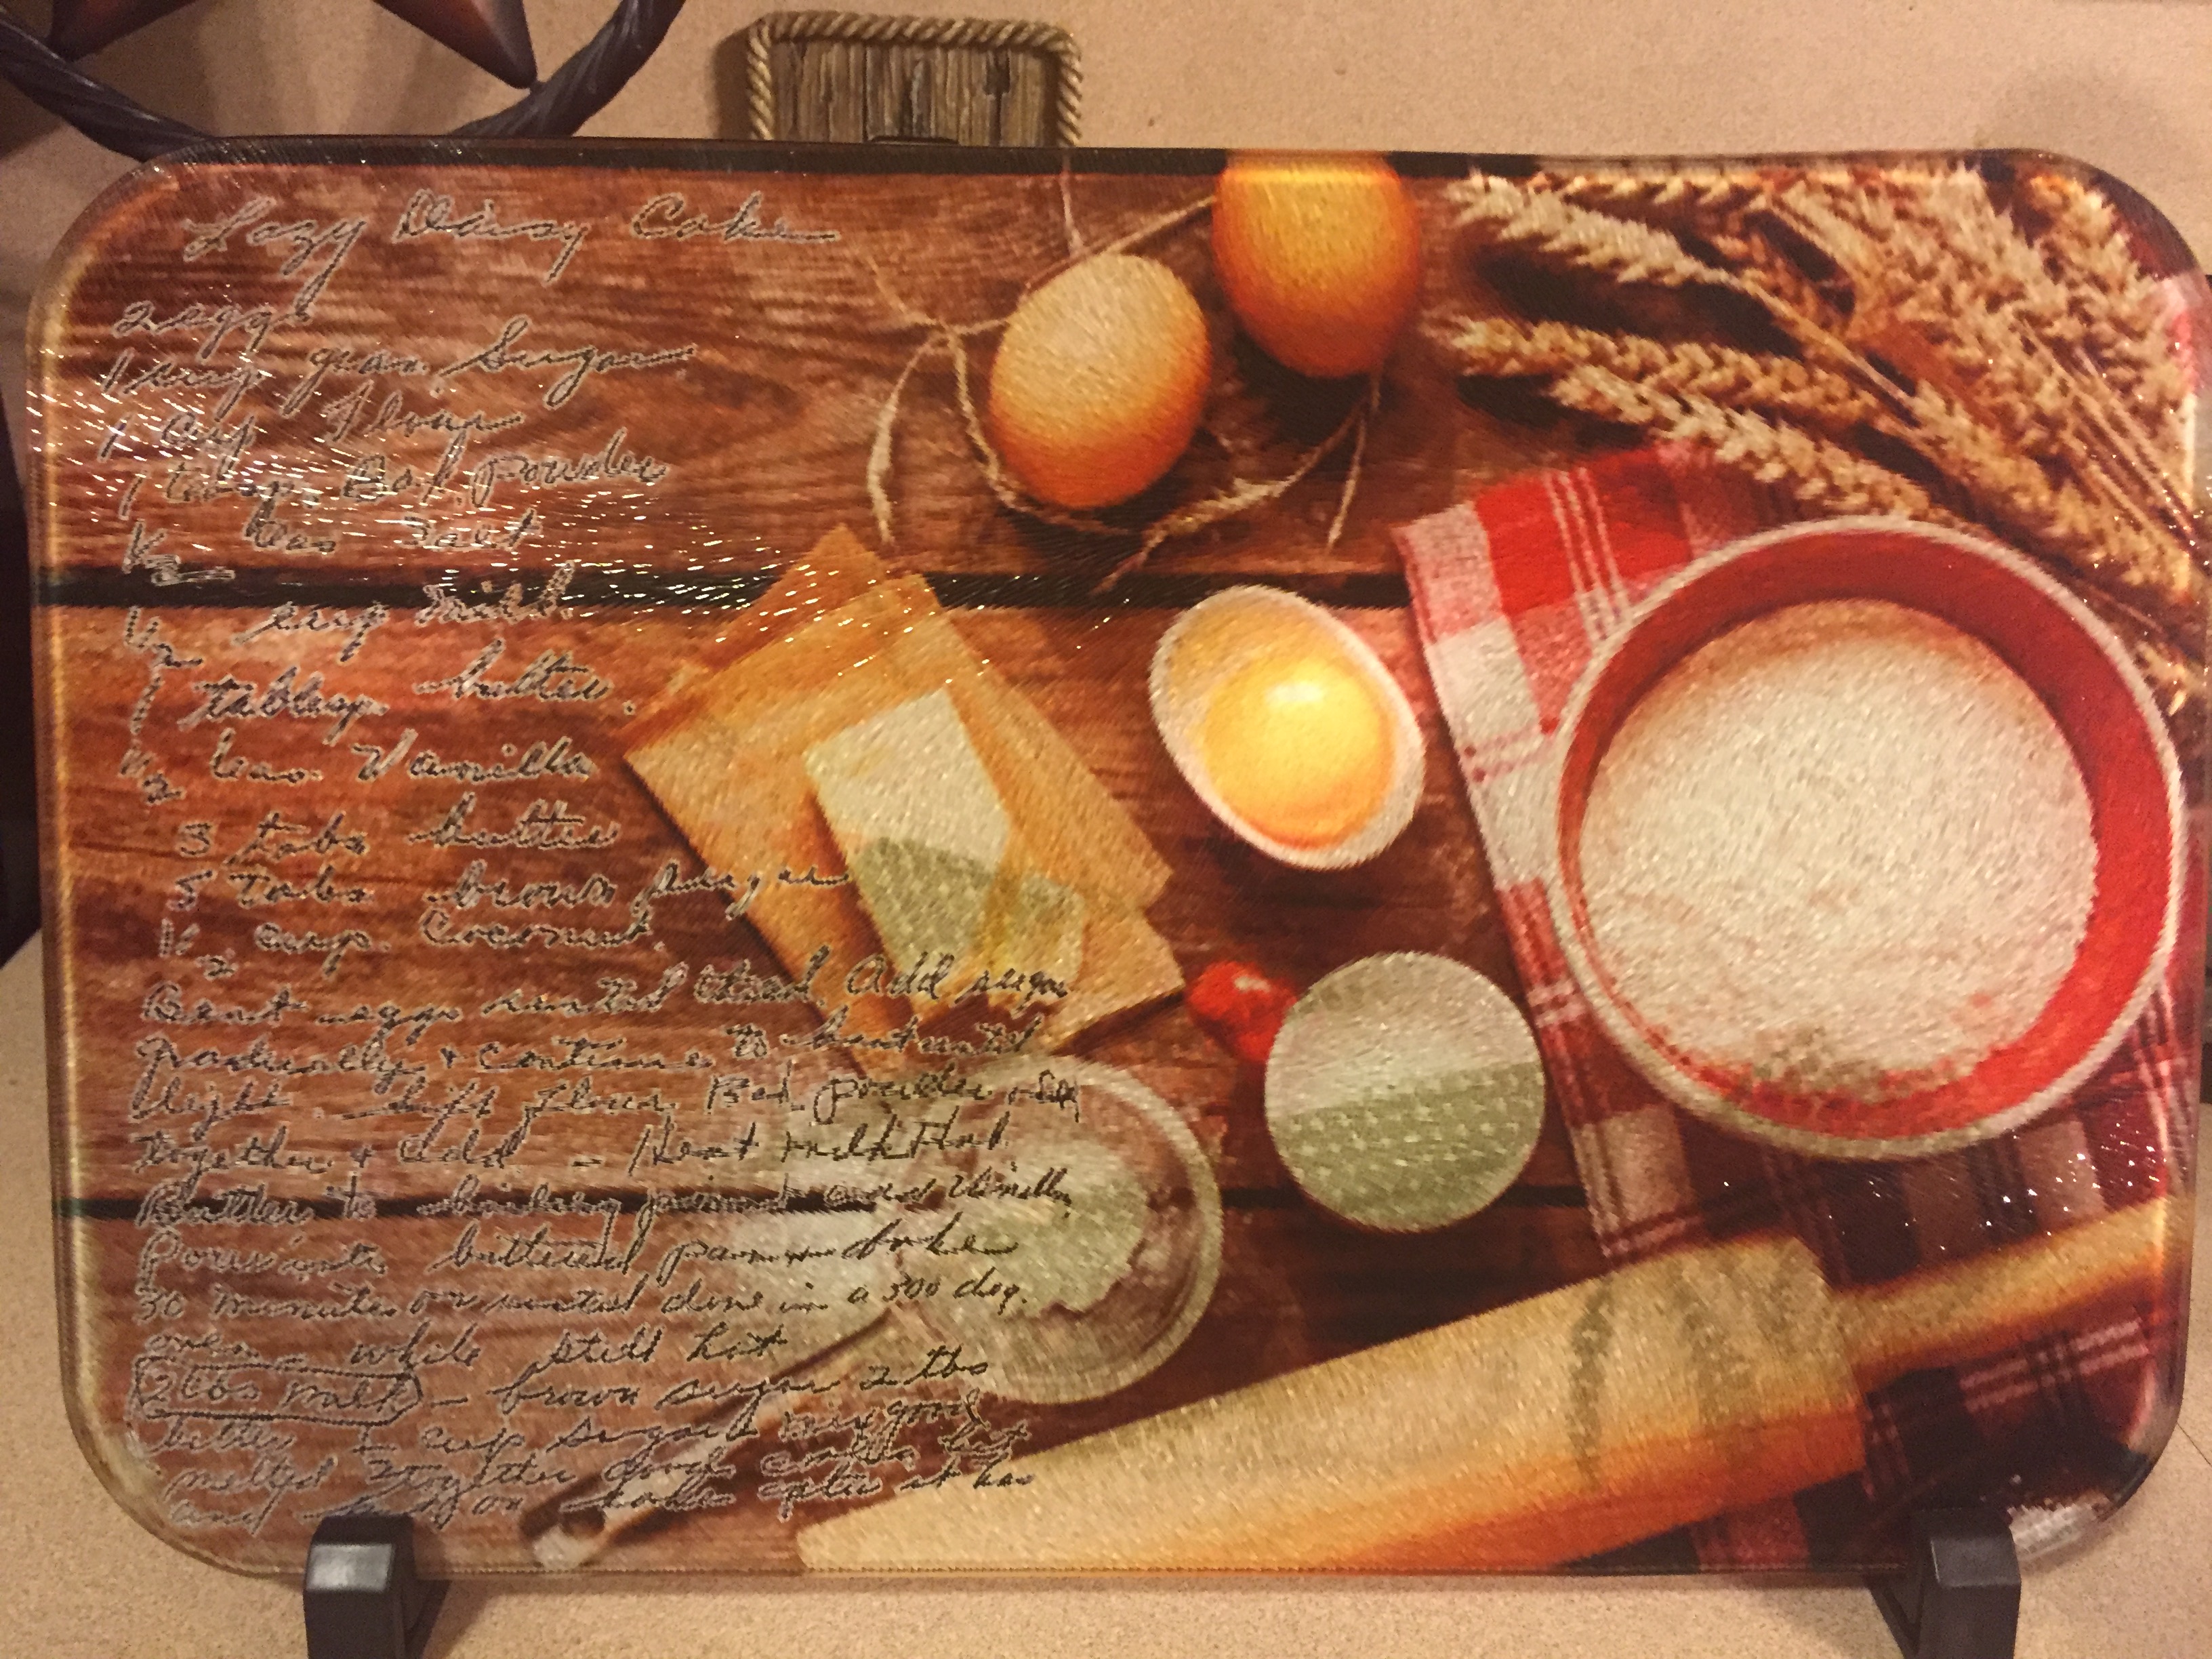 Cutting board made with sublimation printing